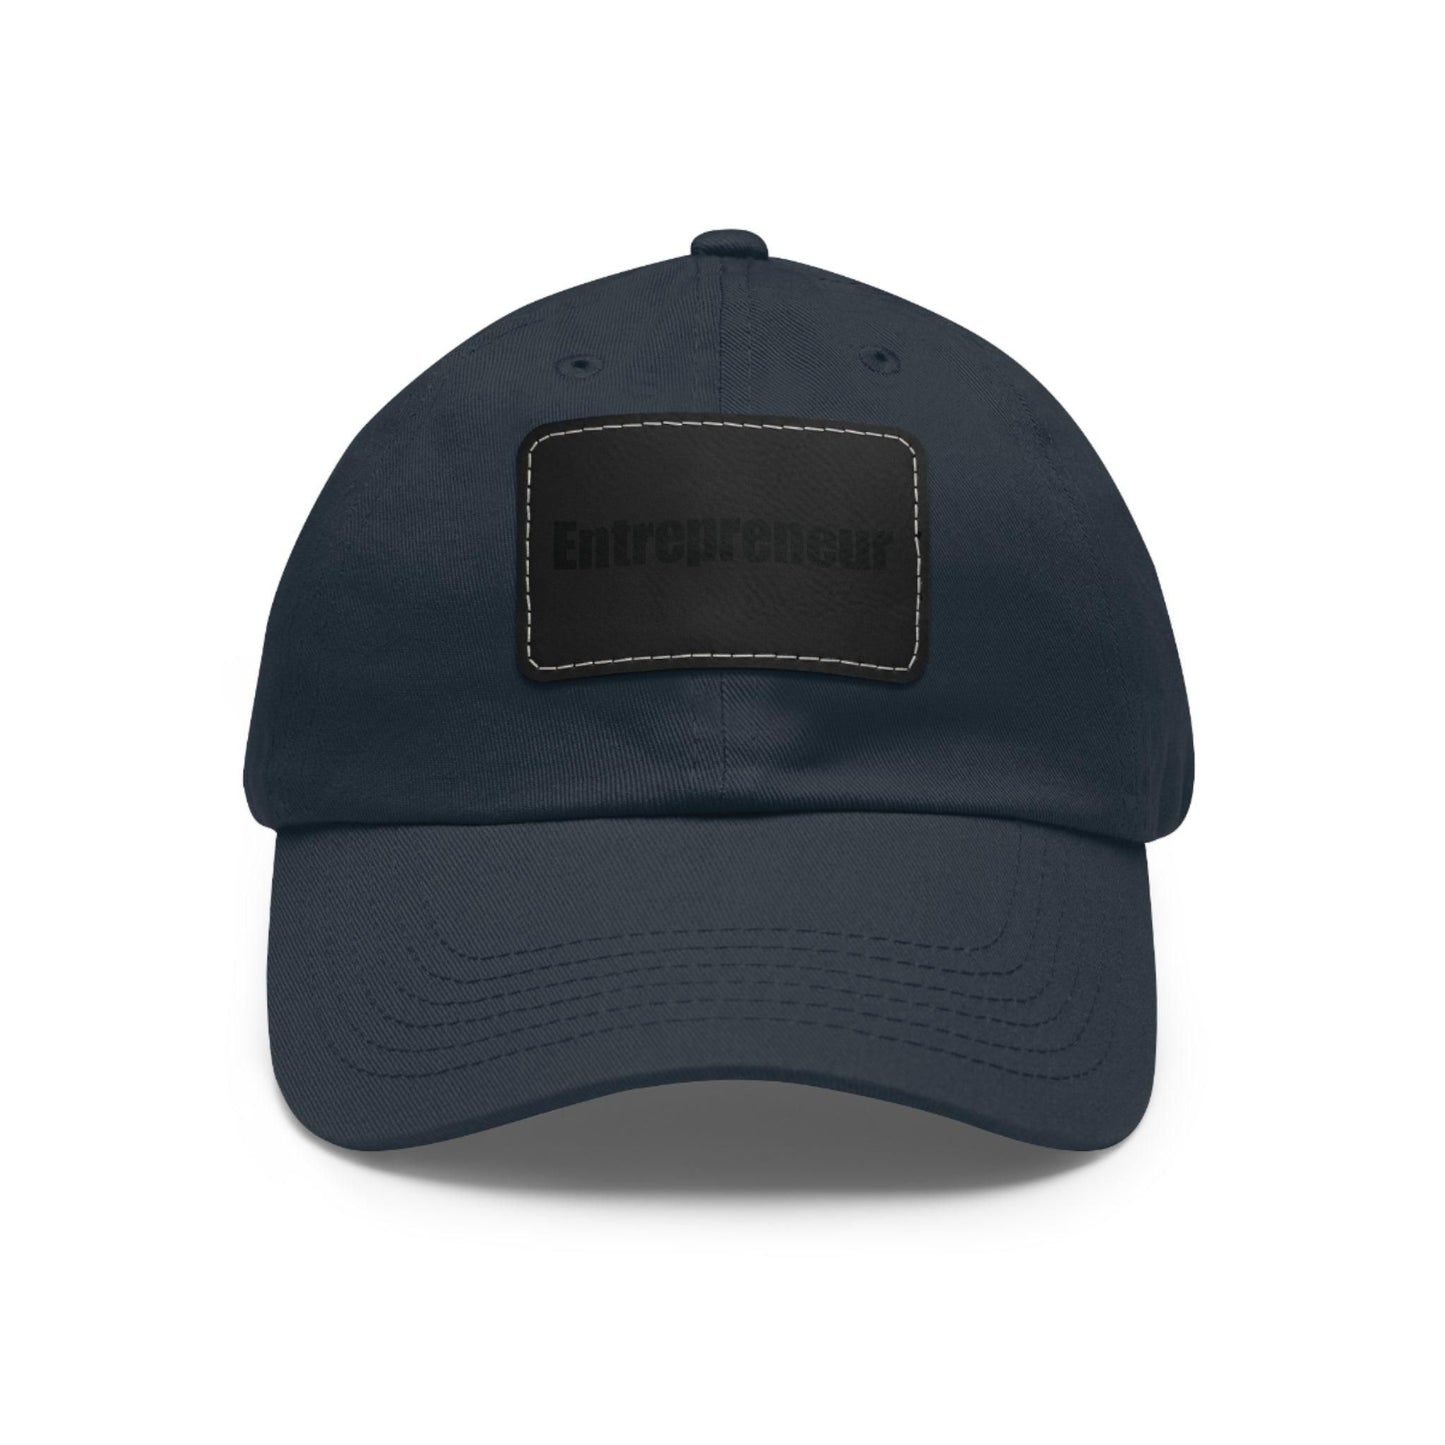 Entrepreneur Baseball Hat with Leather Patch Cap Navy / Black patch Rectangle One size